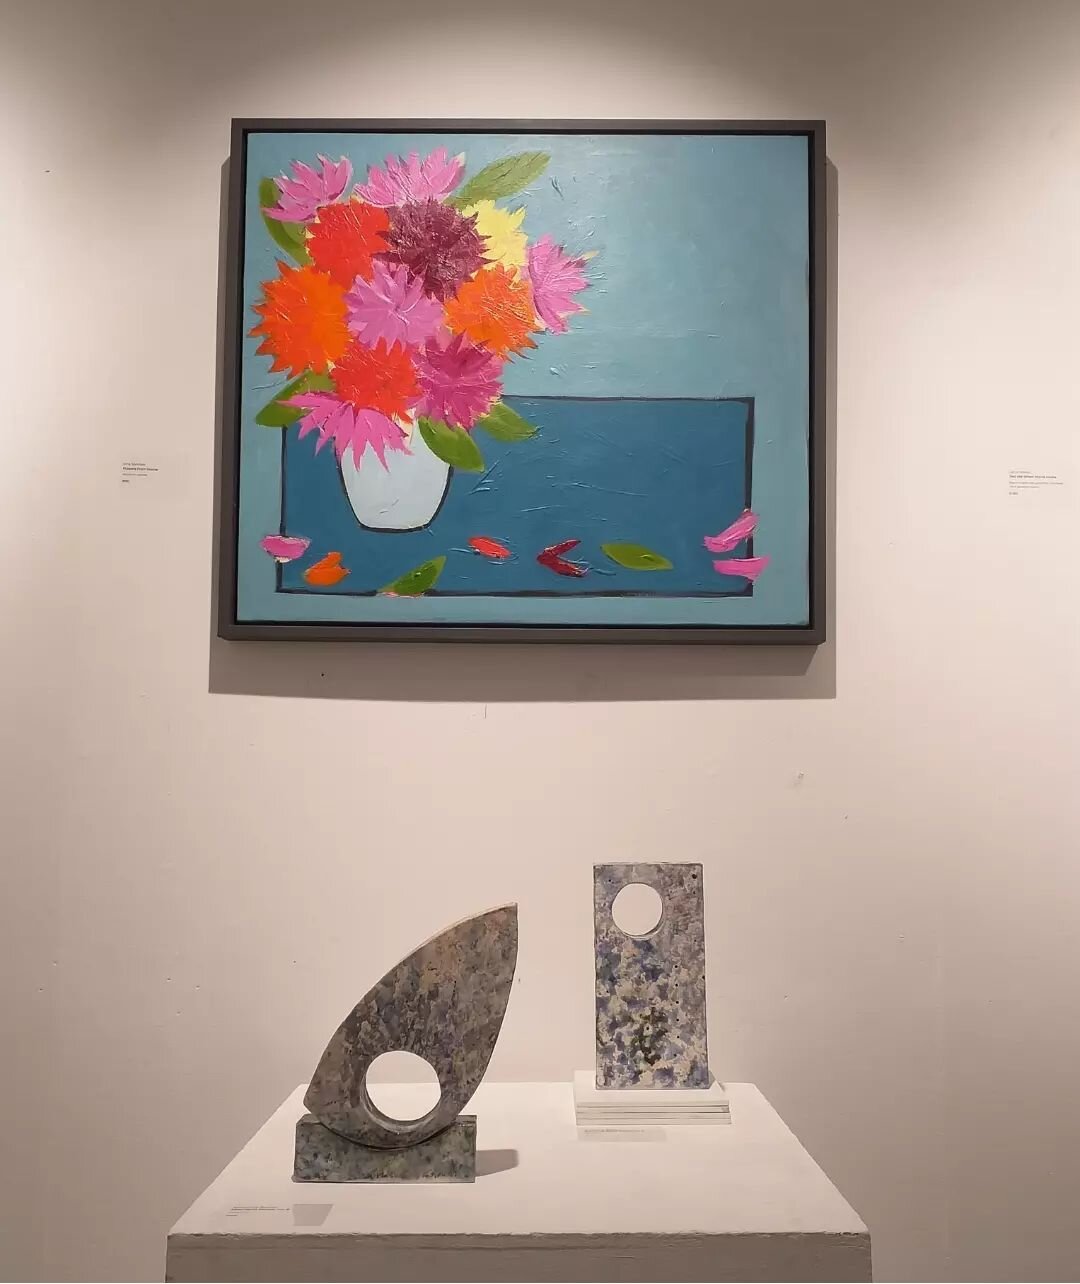 Just been to see my two ceramic sculptures, from the &quot;Standing Stones &quot; and &quot;Moorland&quot; series on display at the Penwith Gallery,  St. Ives. In a great spot, beneath the colourful and eye catching &quot;Flowers from Home&quot; by I